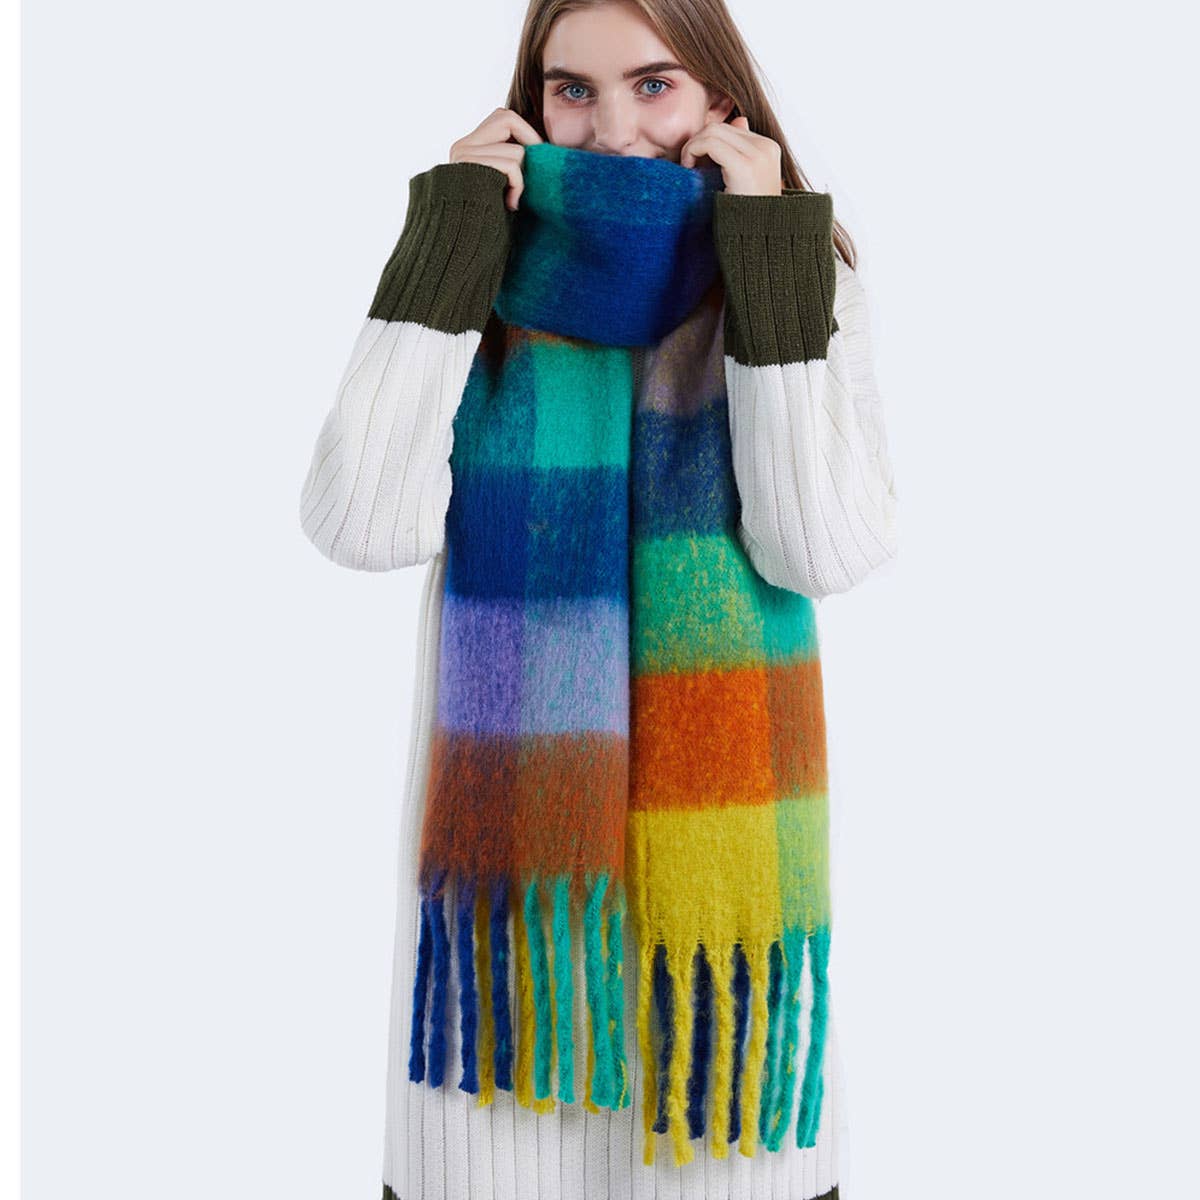 Knitted Plaid Oversize Scarf Scarves